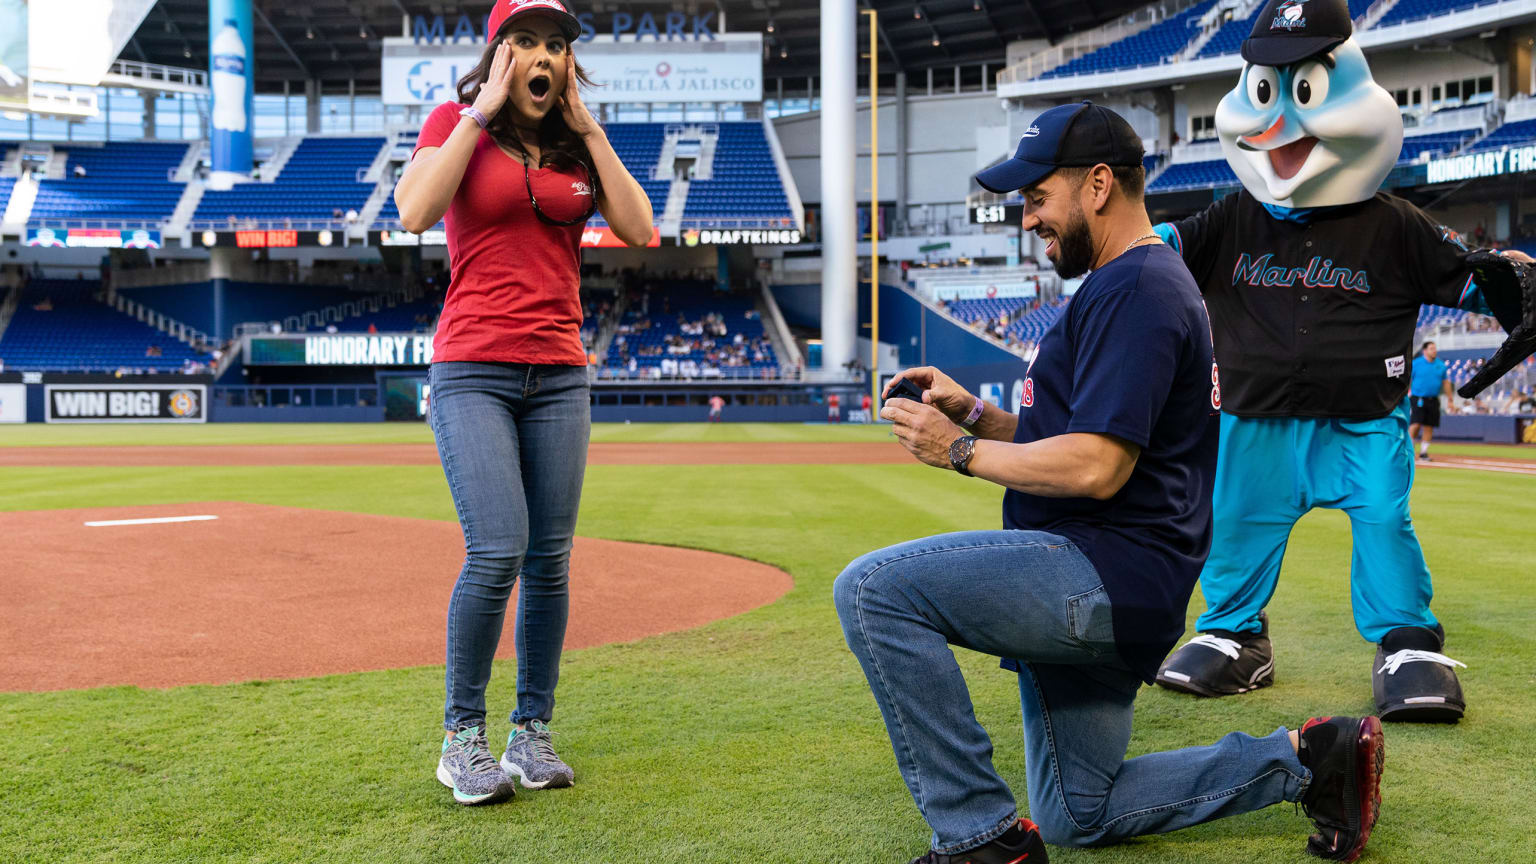 Rays, Marlins Announce Anniversary Promos